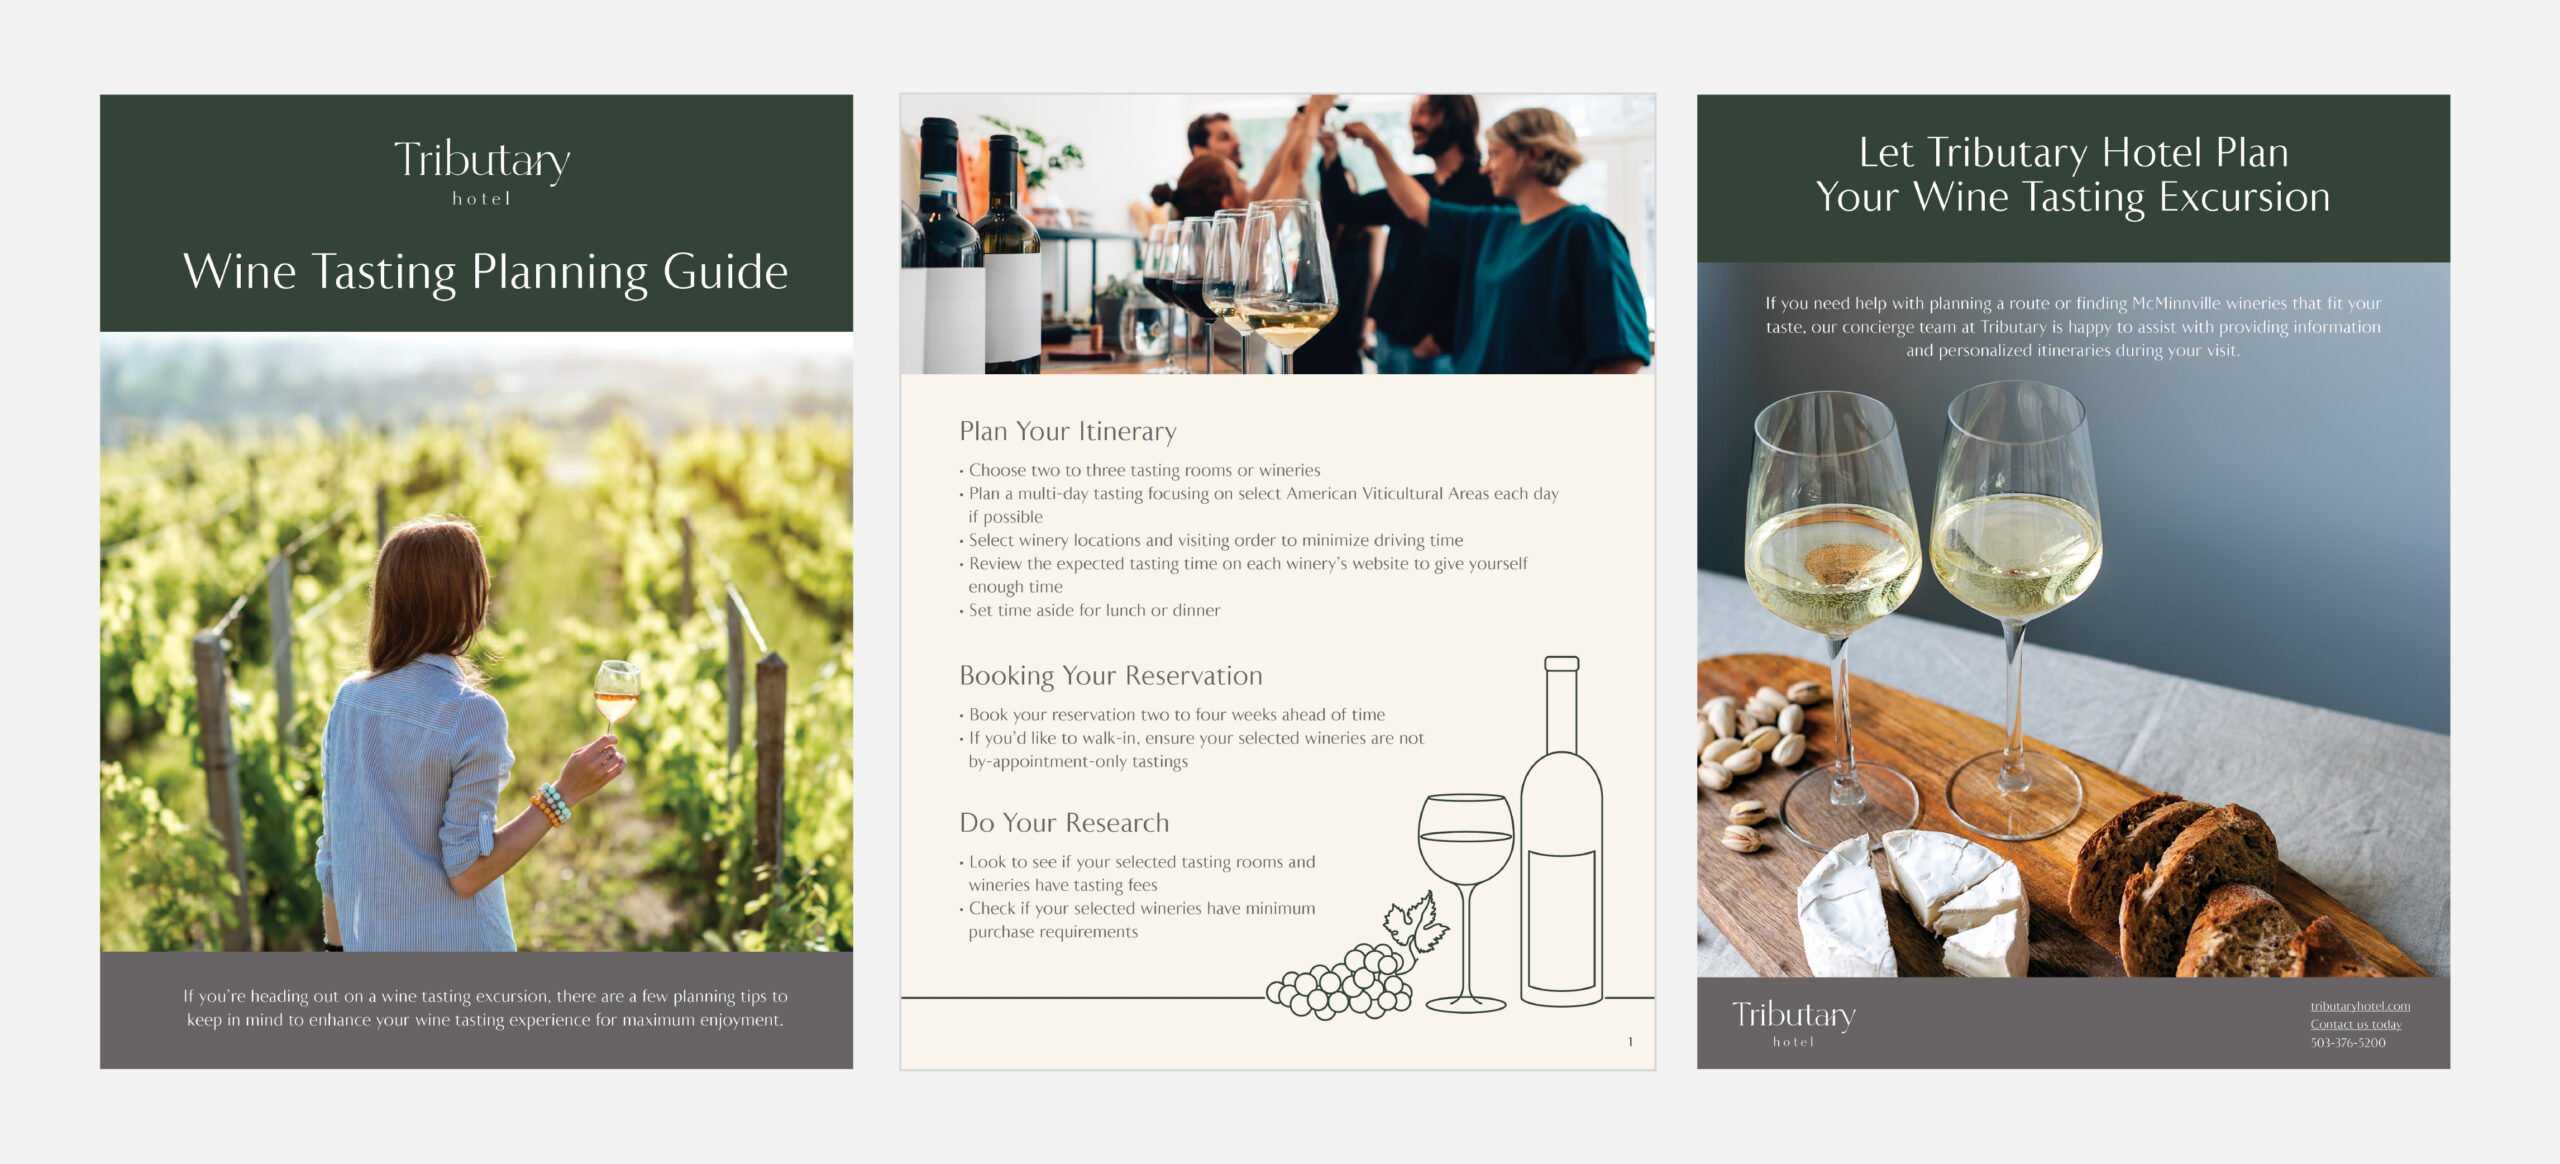 Variety of designed Tributary Hotel assets, including a wine tasting planning guide.